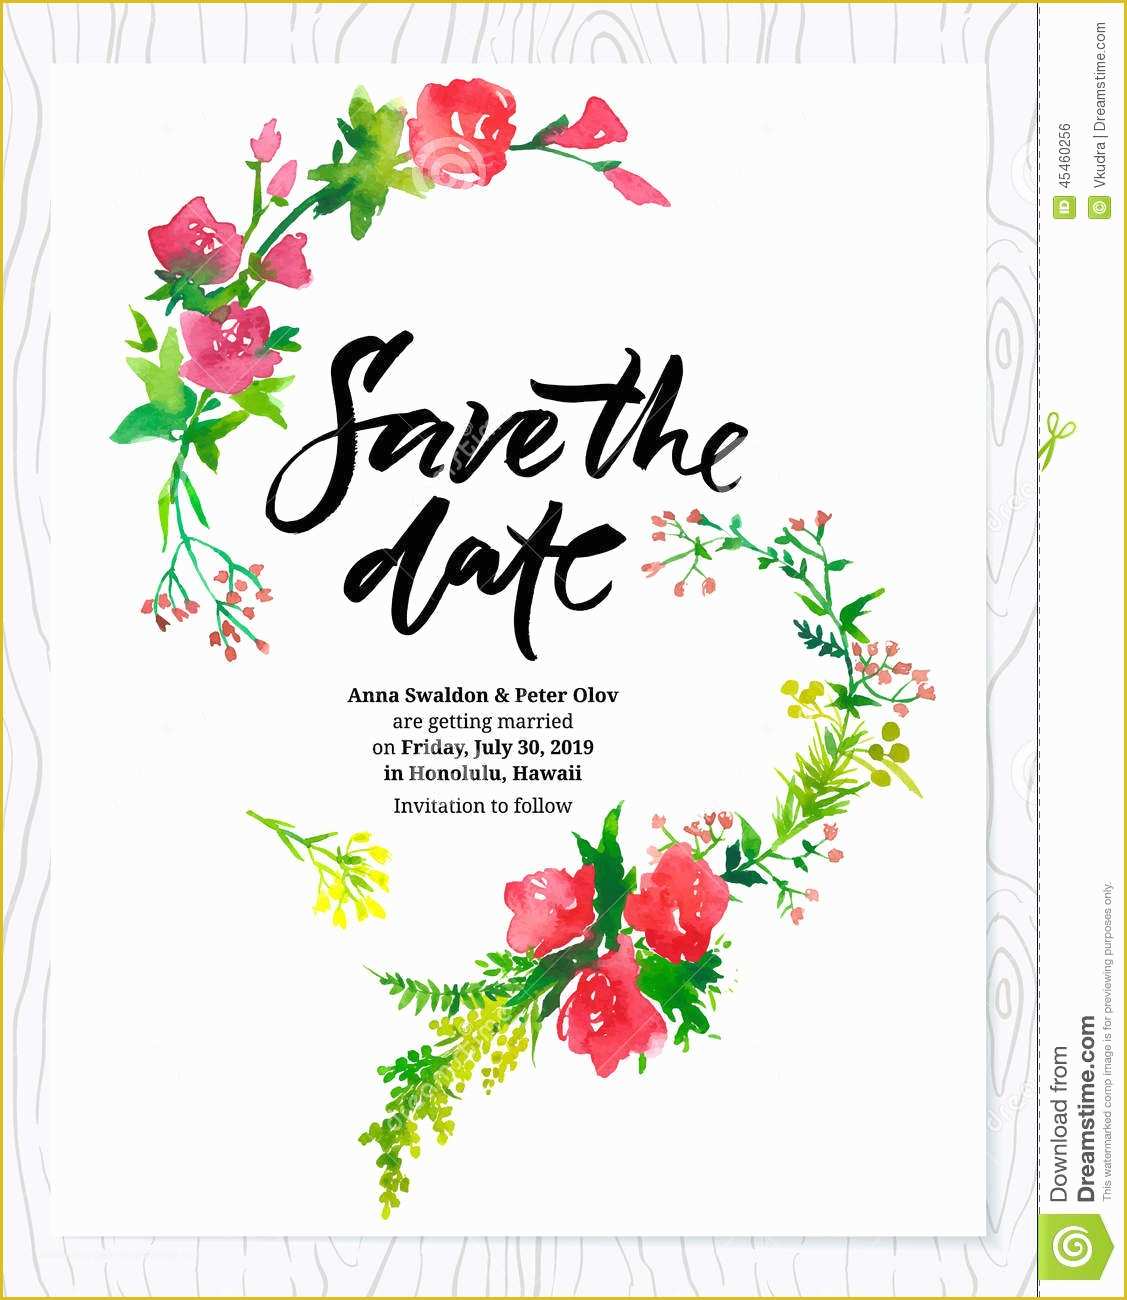 Free Save the Date Wedding Invitation Templates Of Wedding Floral Watercolor Card Save the Date Stock Vector